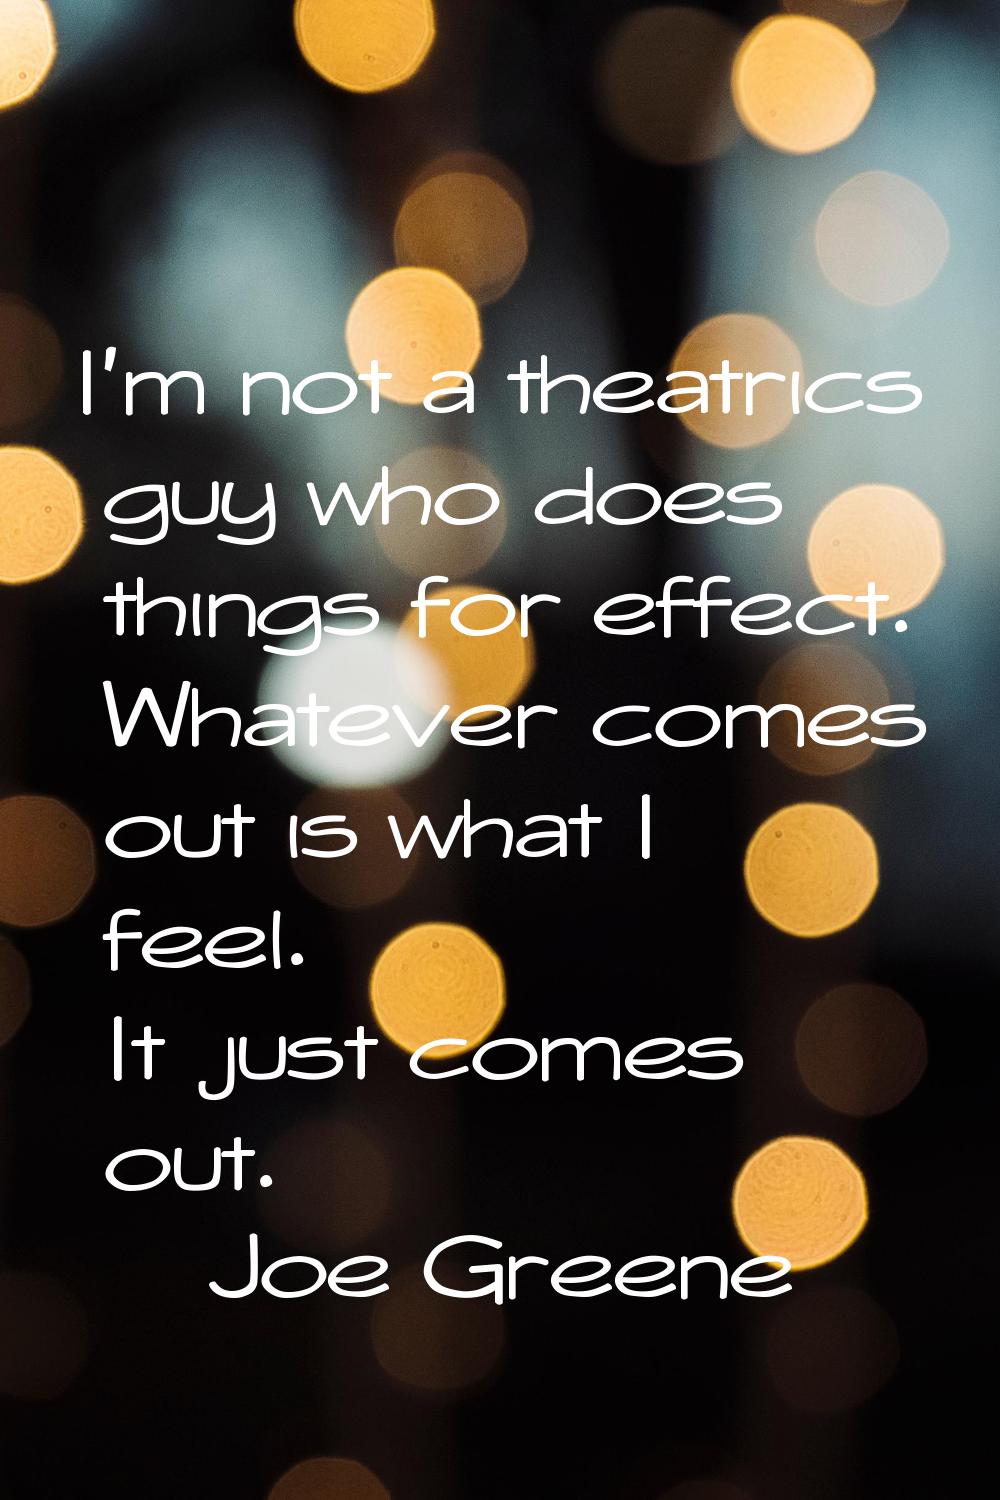 I'm not a theatrics guy who does things for effect. Whatever comes out is what I feel. It just come